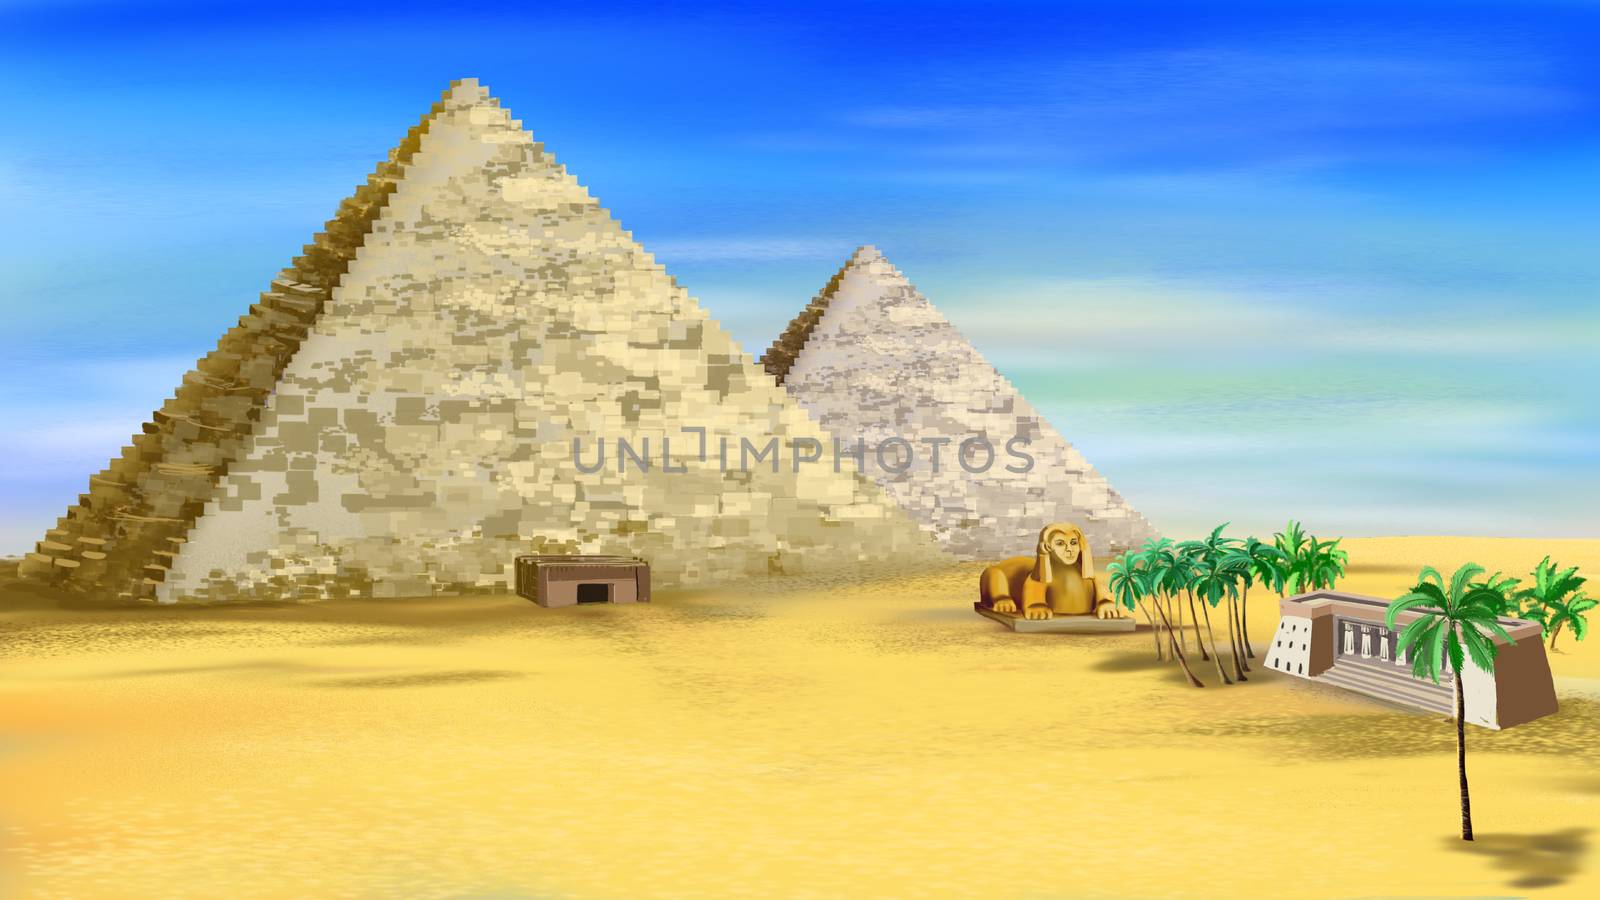 The Egyptian pyramids with entrance and ancient castle. Digital painting background, Illustration in cartoon style character.